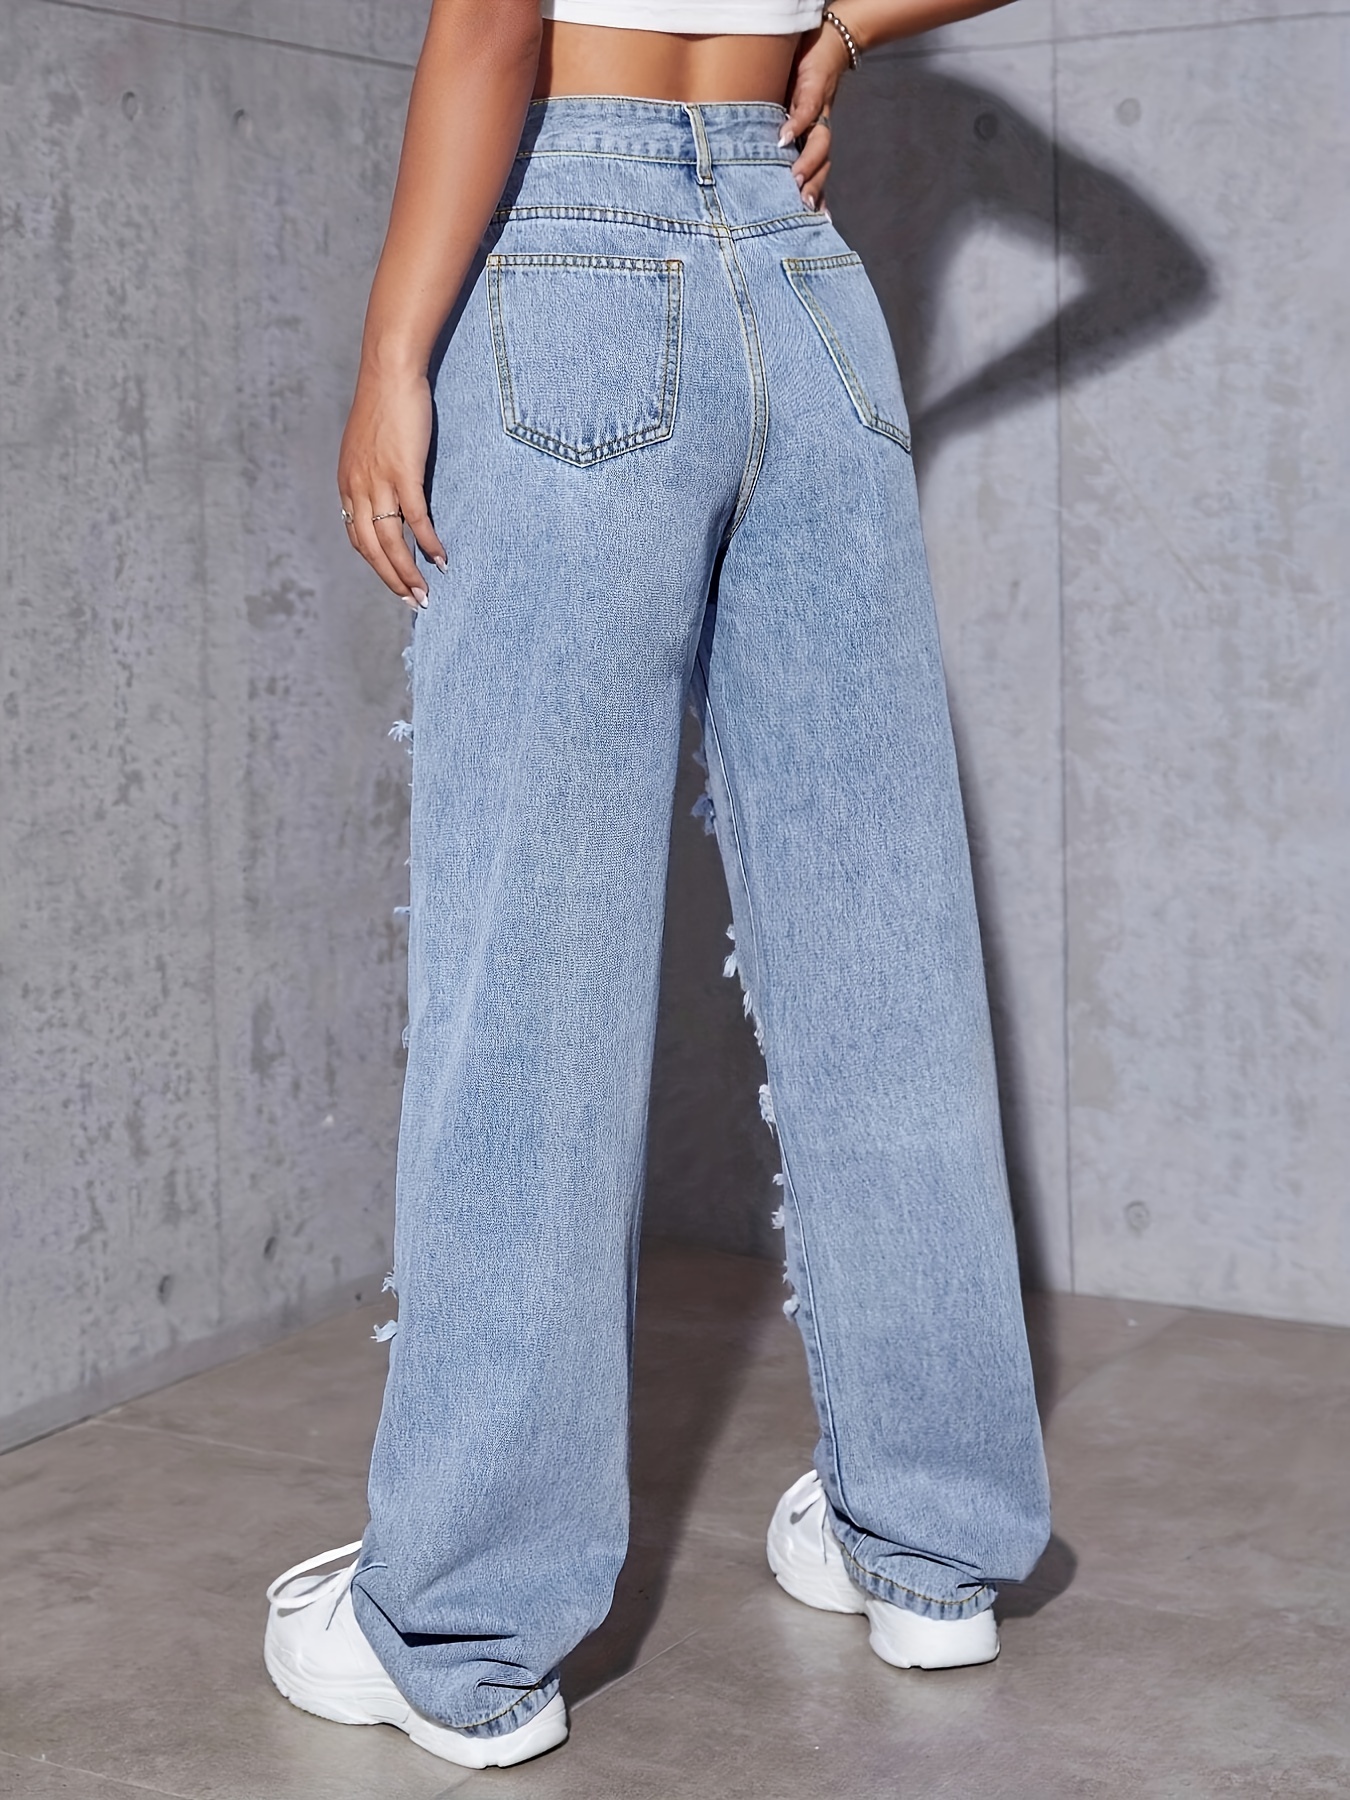 Blue Ripped Loose Mom Jeans Loose Fit Autumn/Spring Trousers For  Fashionable Streetwear, Punk, Funny Harajuku, And Japan Trendy Straight  Style Girl 230404 From Hui02, $18.89